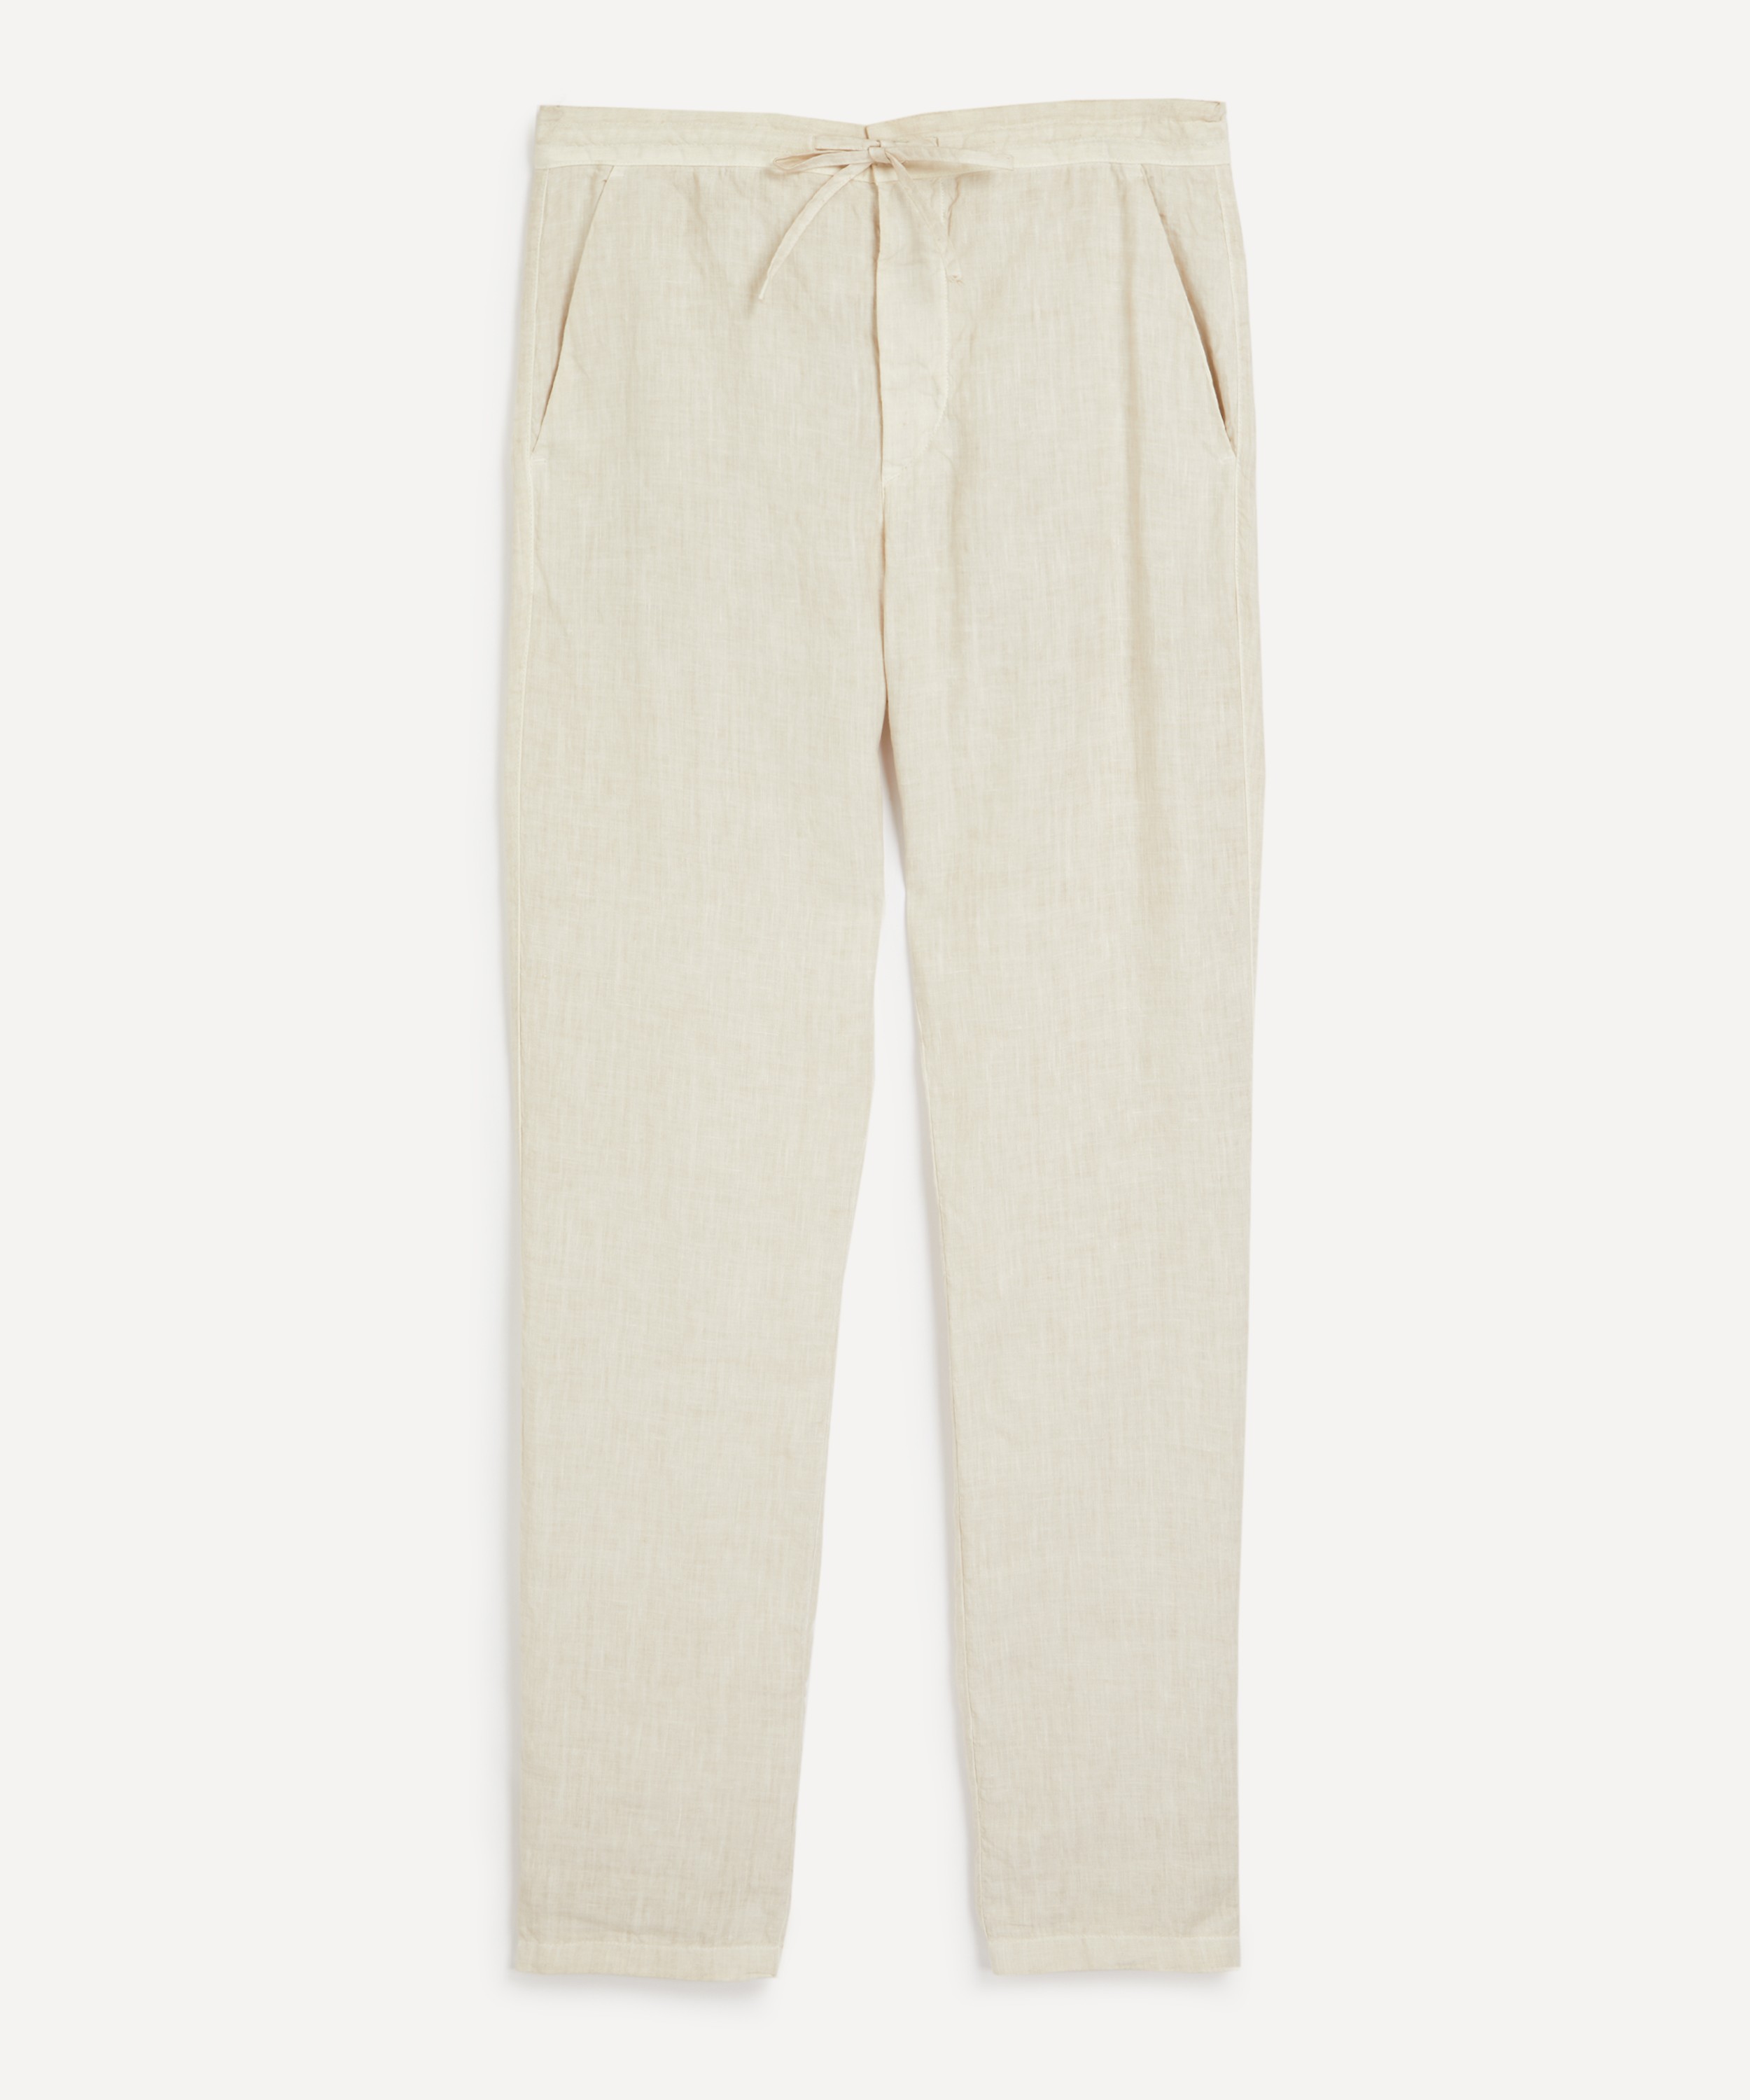 120% Lino - Linen Drawstring Trousers image number 0